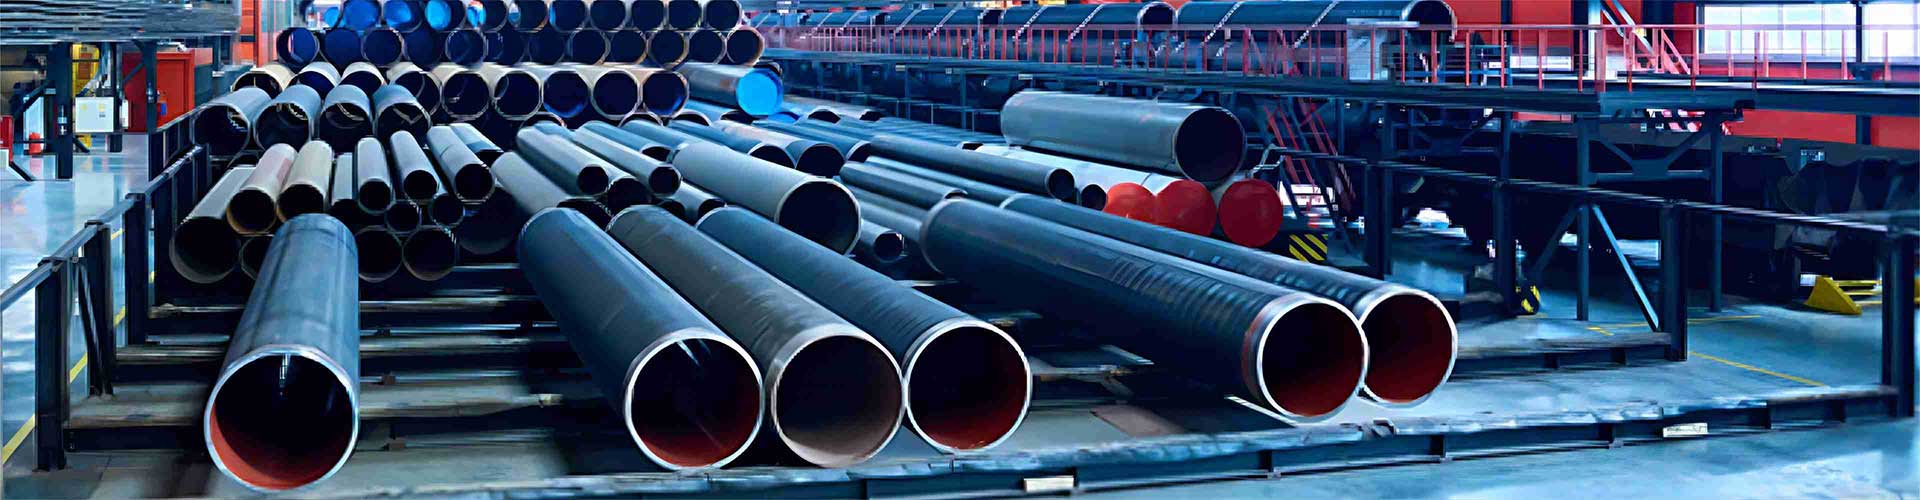 OCTG pipe,Boier tube,ASTM A106 steel pipe